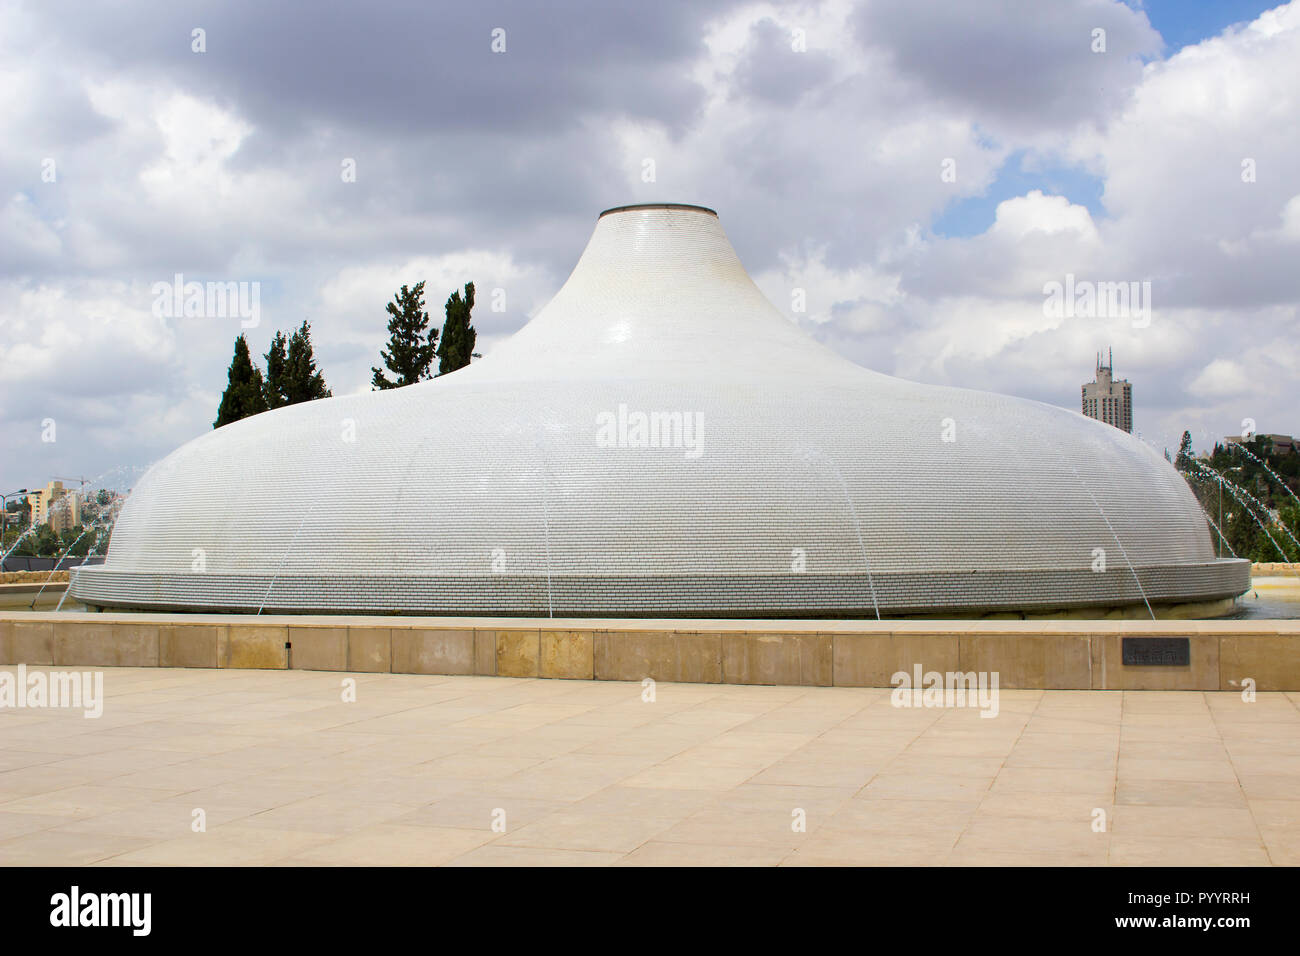 9 May 2018 The Shrine of the Book Dome fountain at the Israel Museum in Jerusalem that houses the Dead Sea Scrolls found in Qumran in the Dead Sea wil Stock Photo